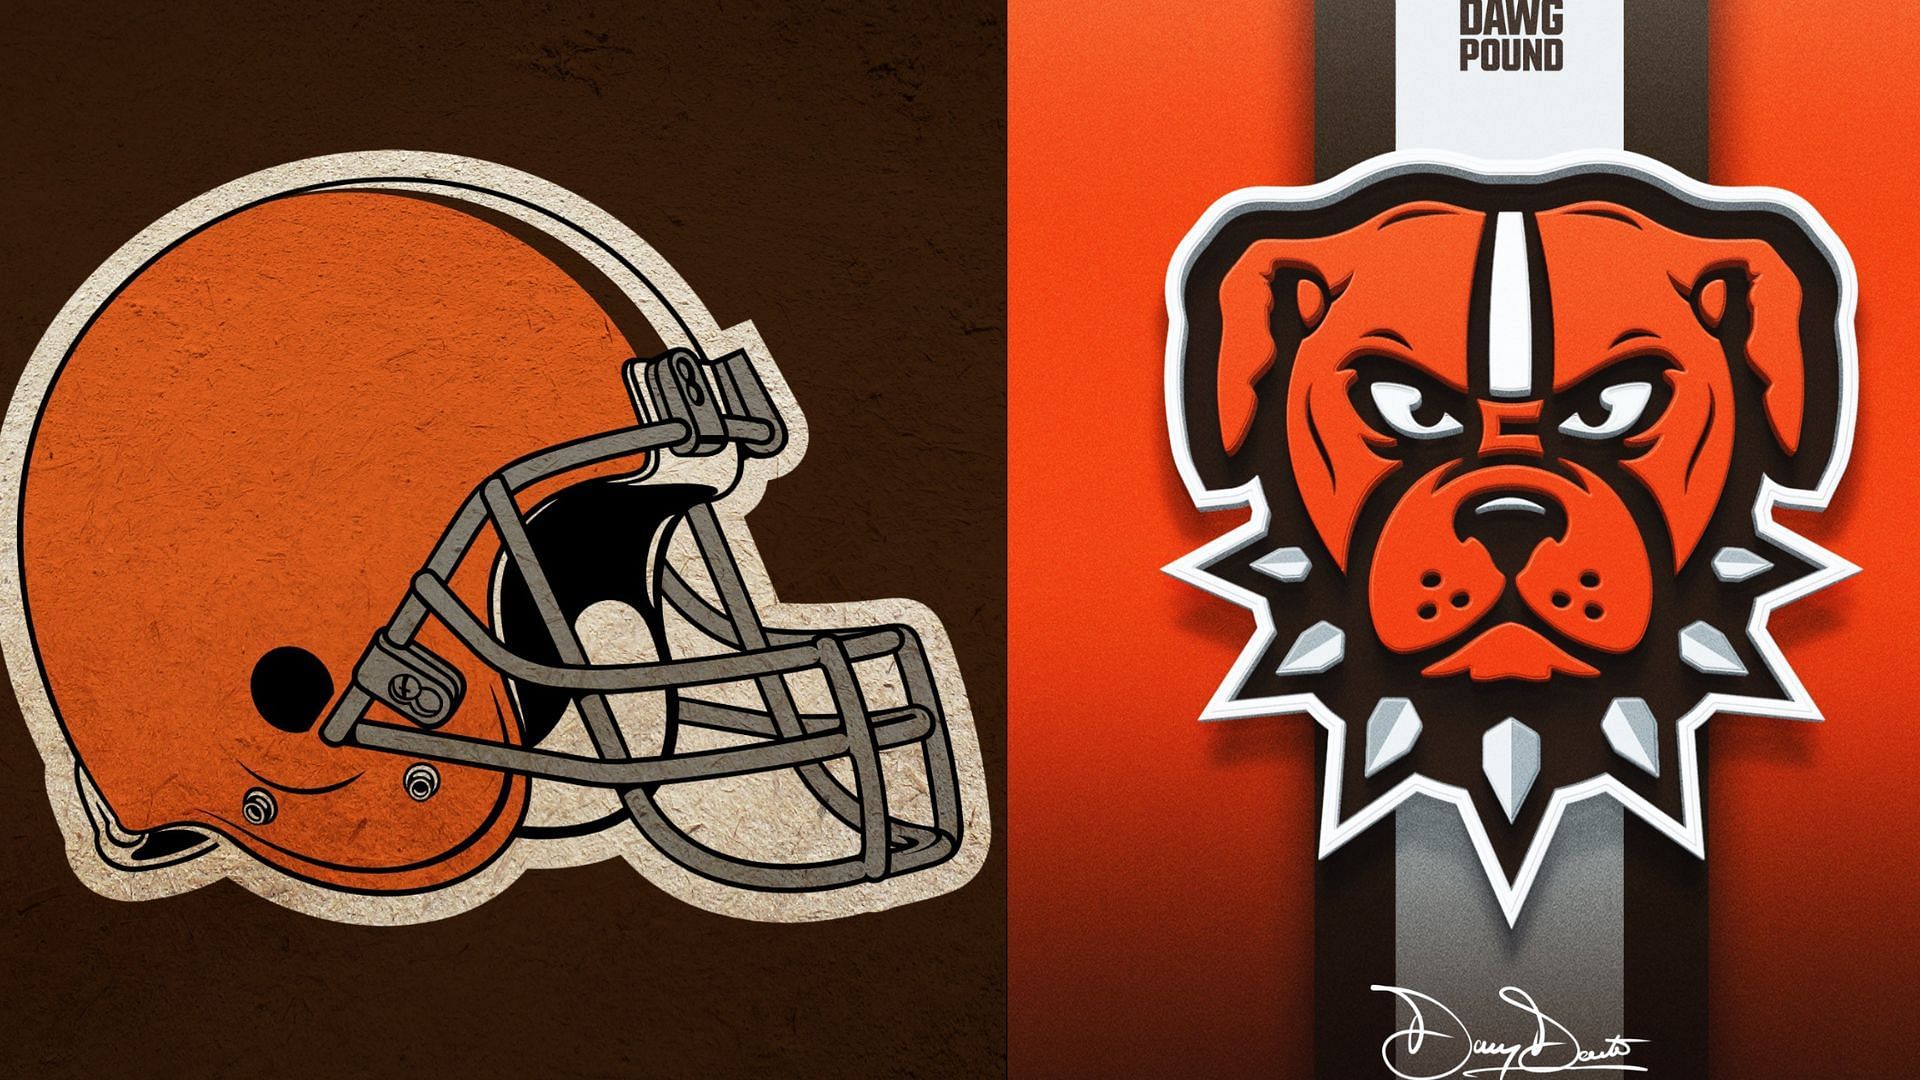 Designer Danny Devito submits a new Browns logo to the delight of Browns fans